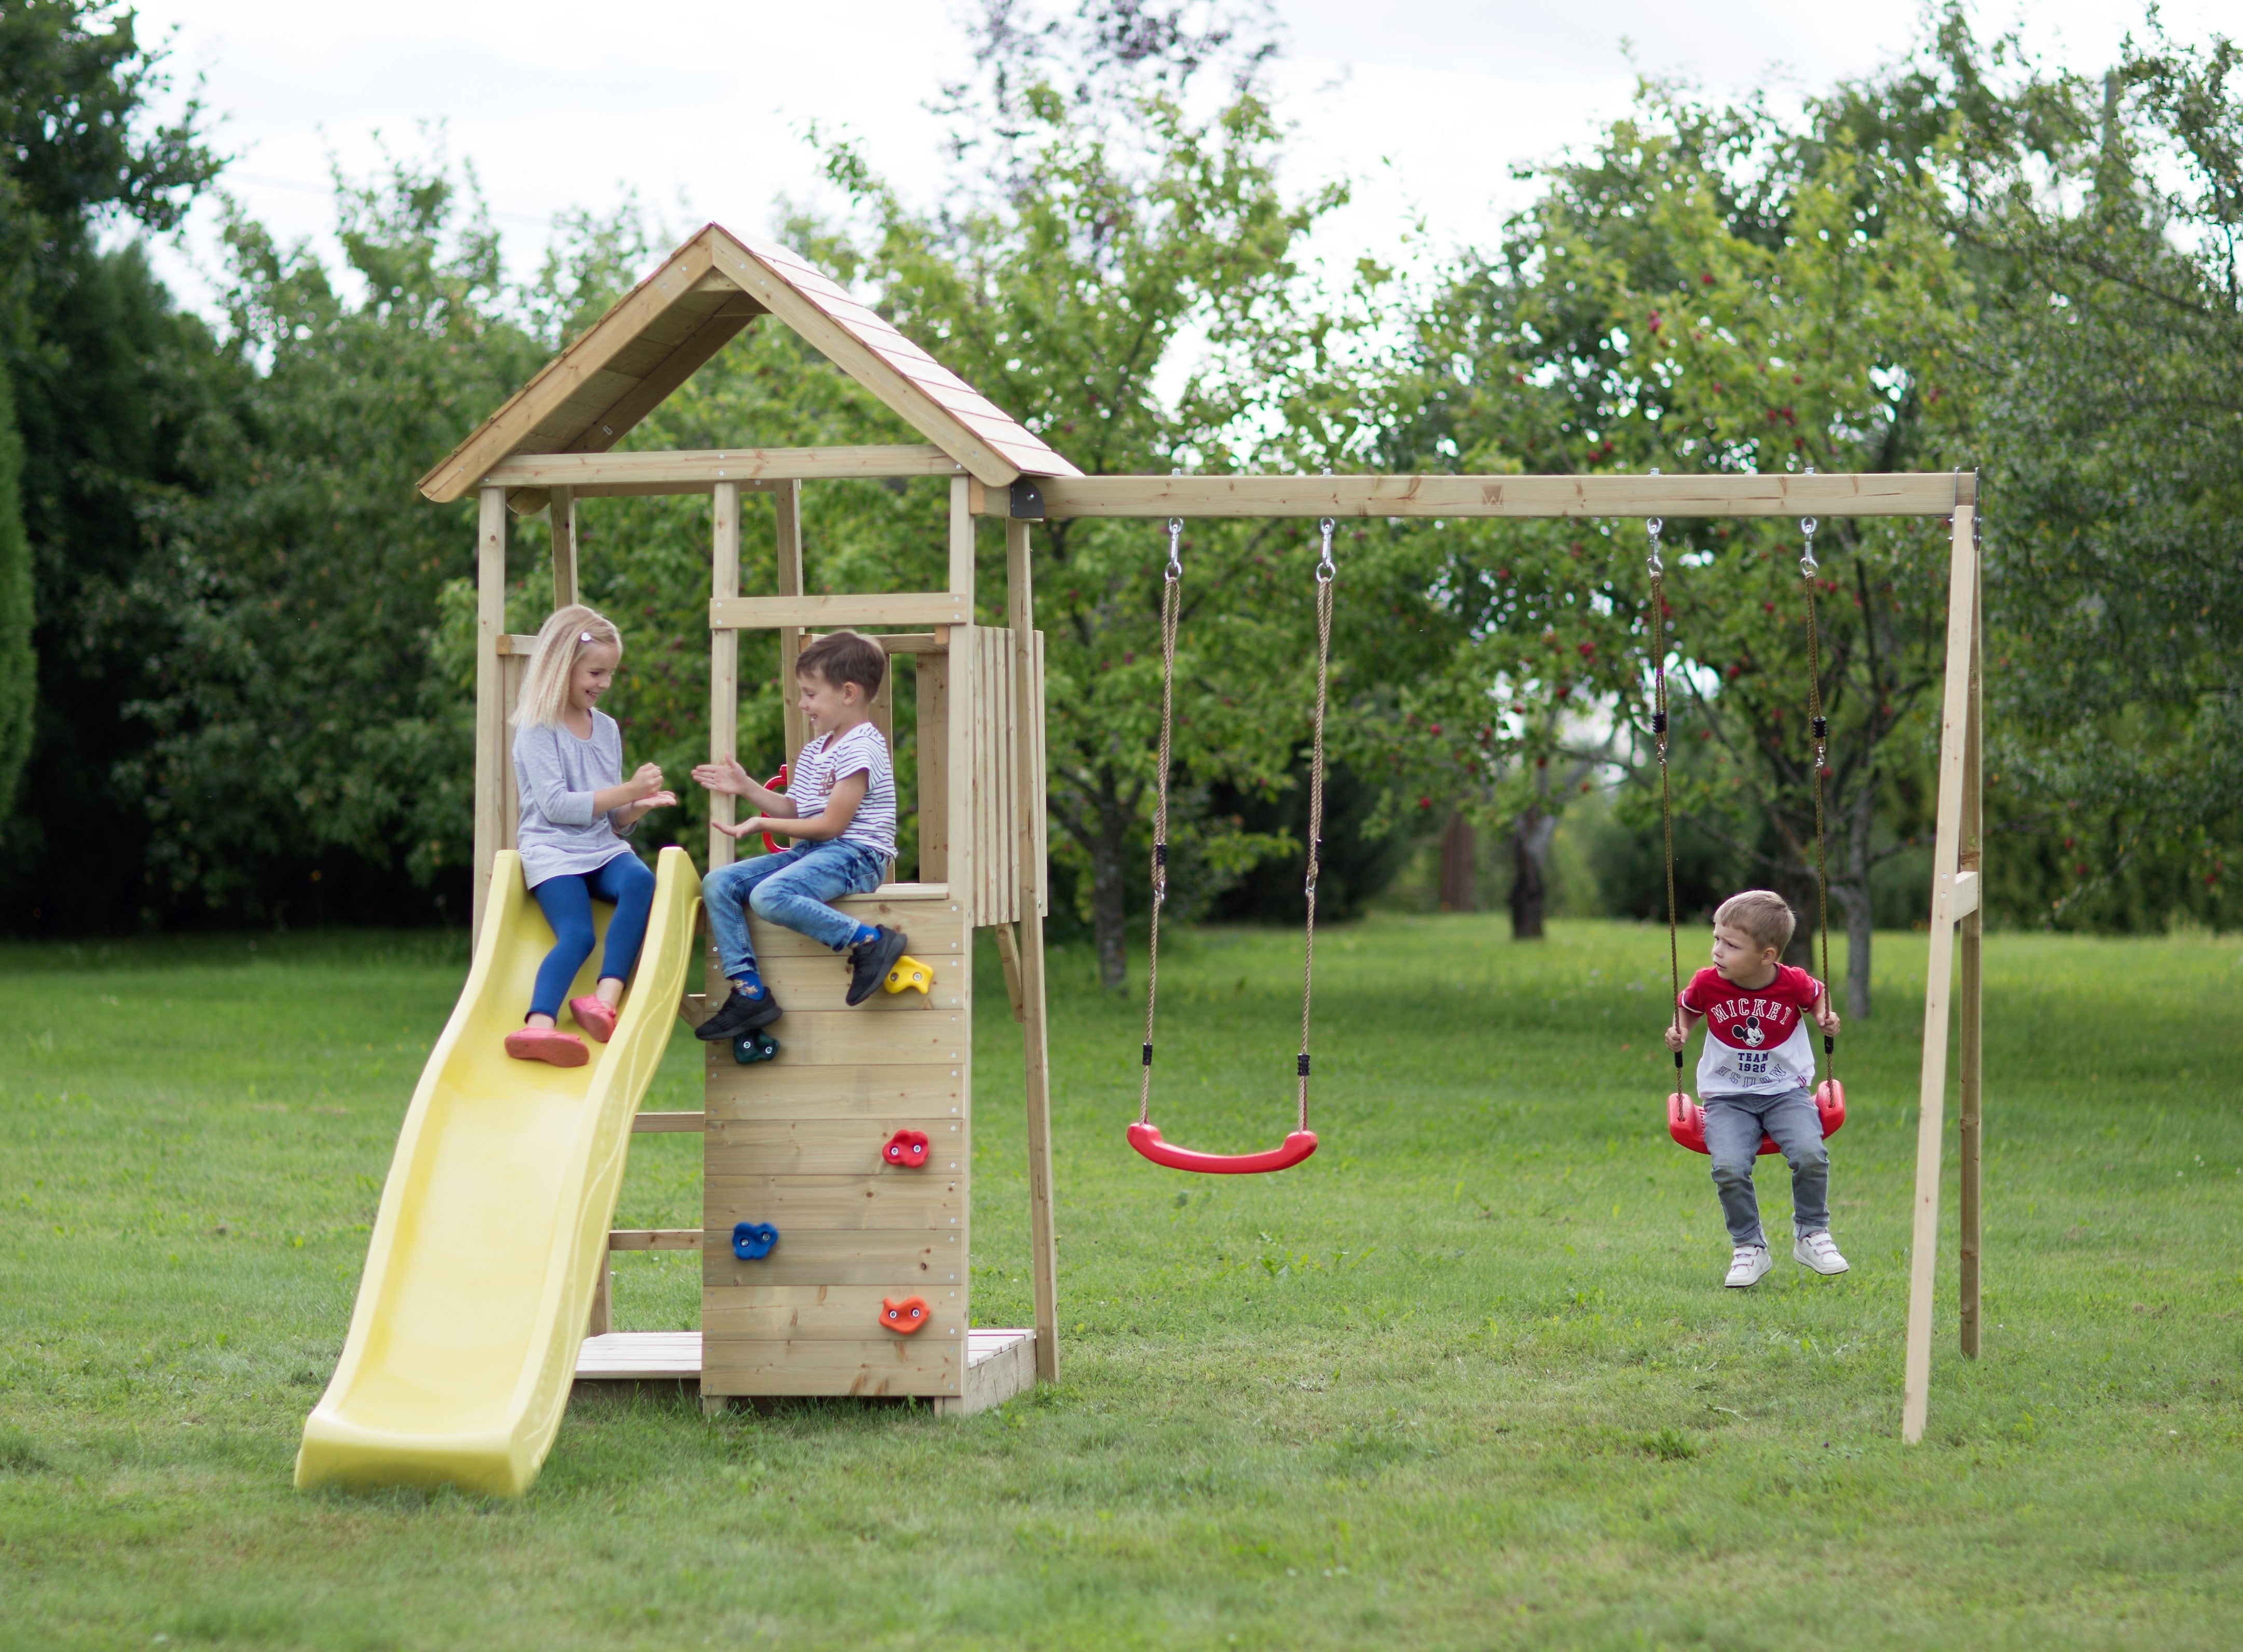 J5 Junior Play Tower with Slide, Sandpit and Double Swing